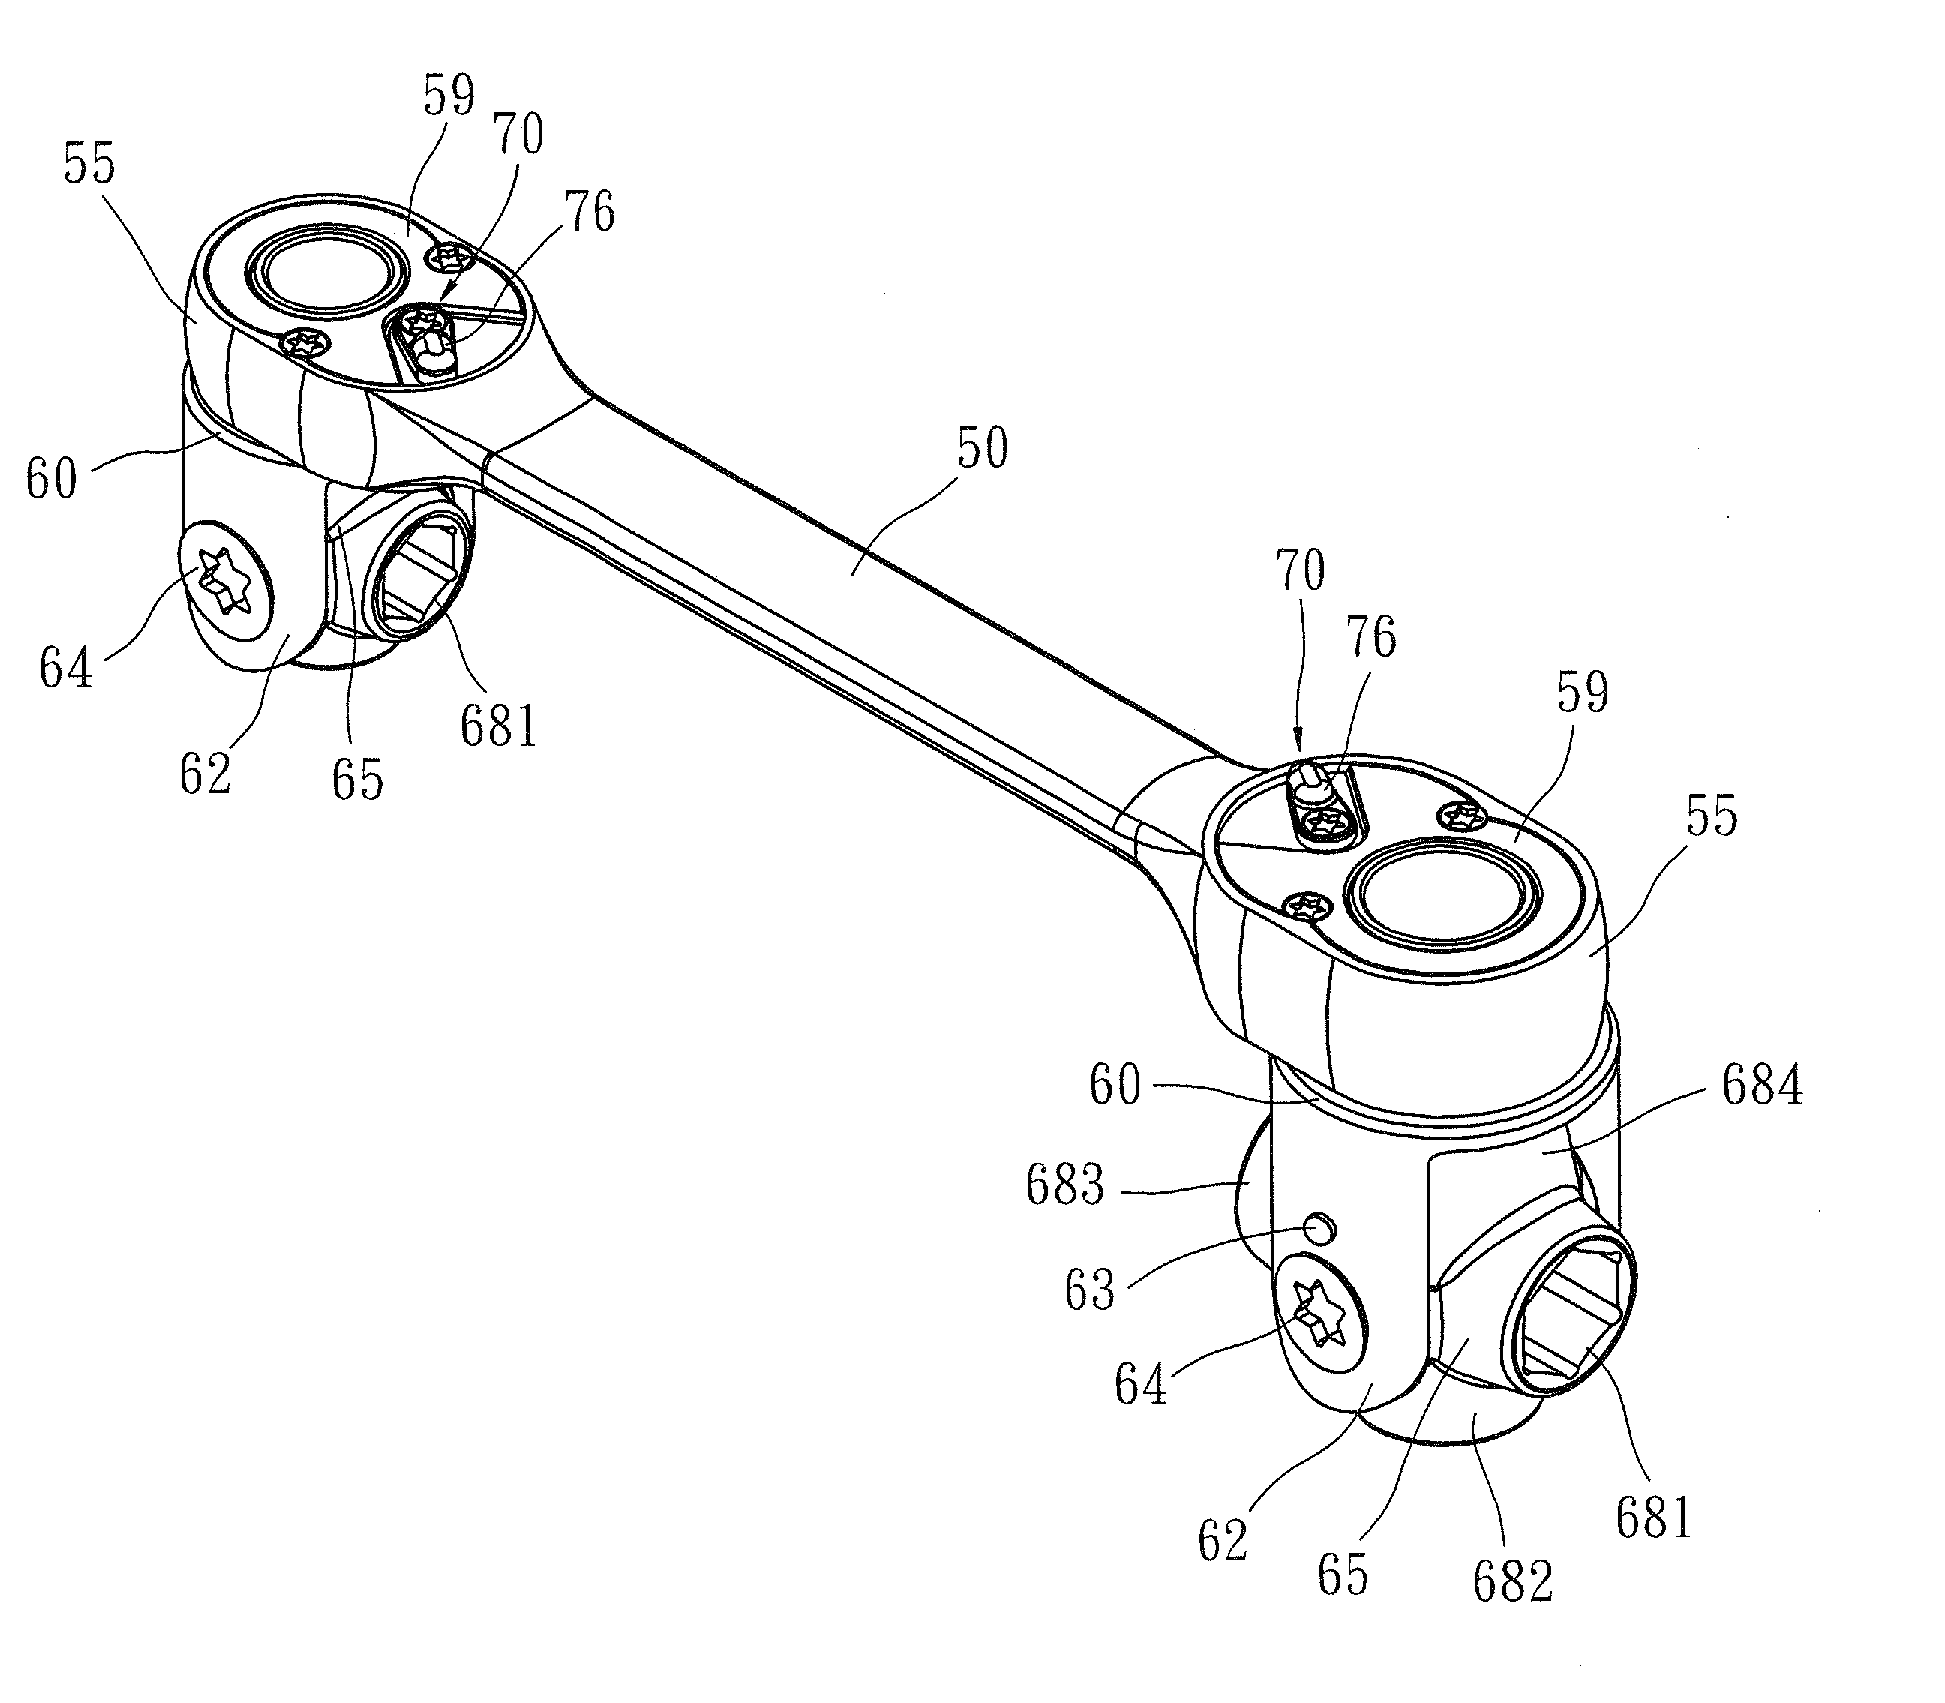 Ratchet wrench having rotatably attached sockets